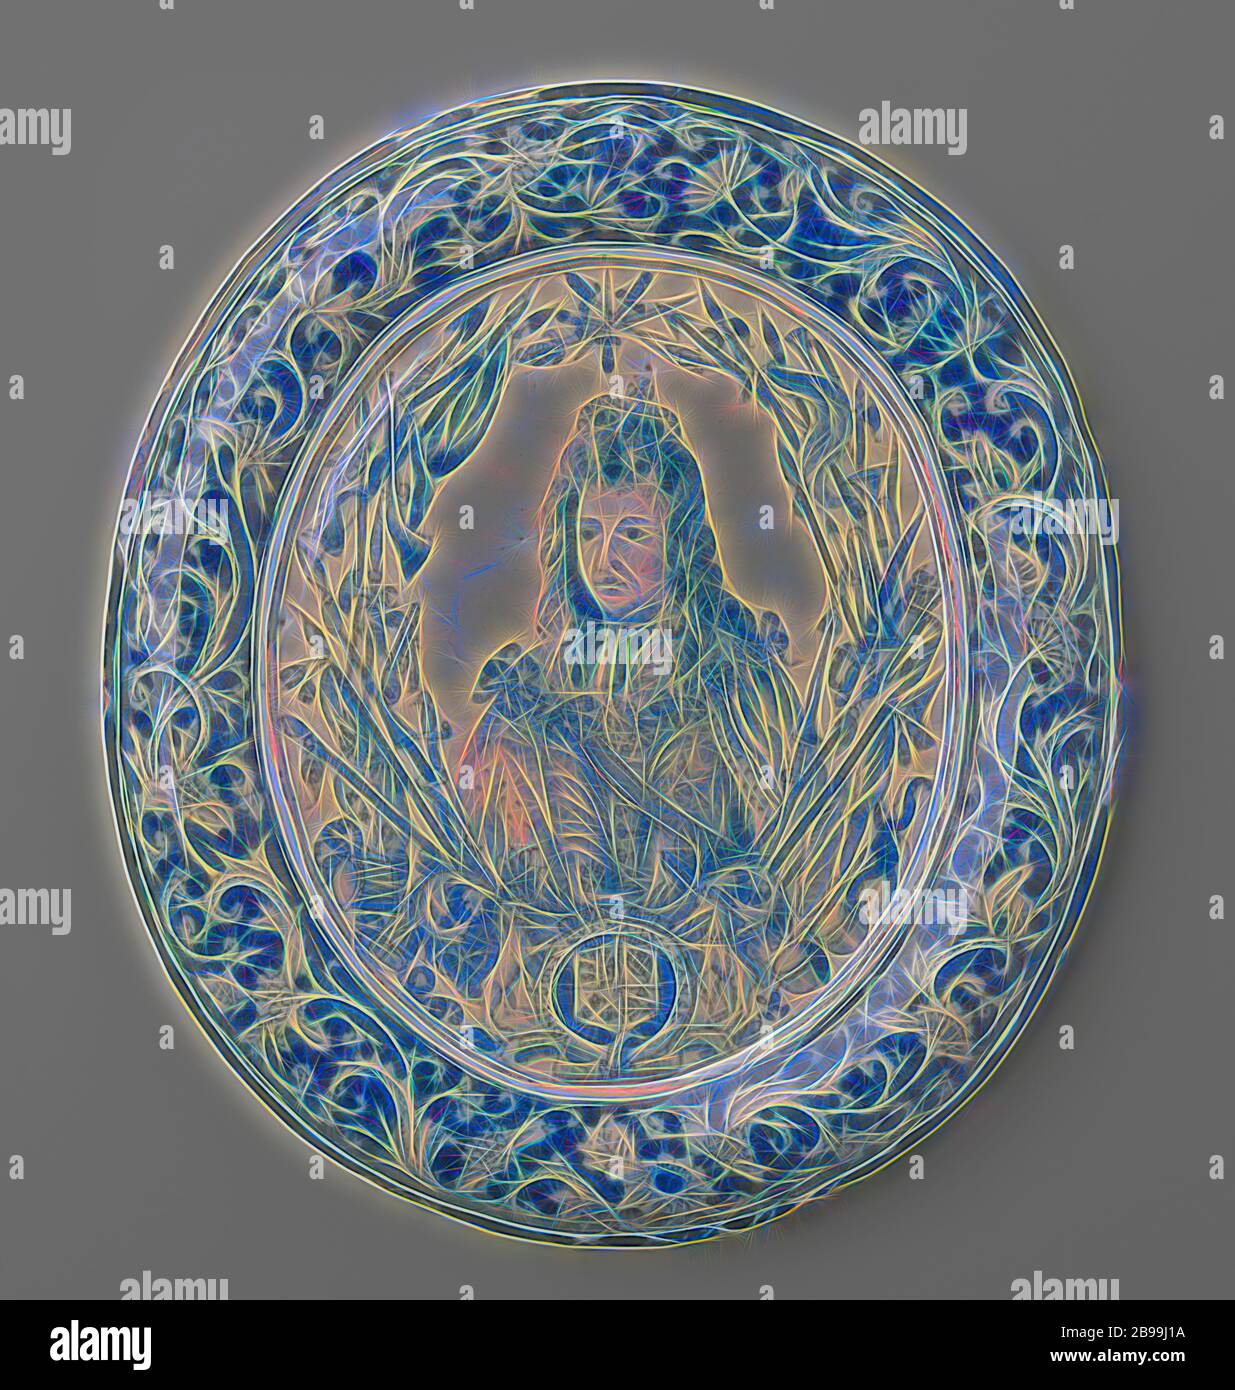 George I, King of England, Plaque of Faience. Painted blue with the portrait of George I, King of England (1714-1728). Possibly a fake after Dutch or English example. The object is (probably) a DECREASE, England, George I (King of Great Britain and Ireland), anonymous, Netherlands (possibly), 1720 - 1740 and/or 1830 - 1880, h 23.5 cm, Reimagined by Gibon, design of warm cheerful glowing of brightness and light rays radiance. Classic art reinvented with a modern twist. Photography inspired by futurism, embracing dynamic energy of modern technology, movement, speed and revolutionize culture. Stock Photo